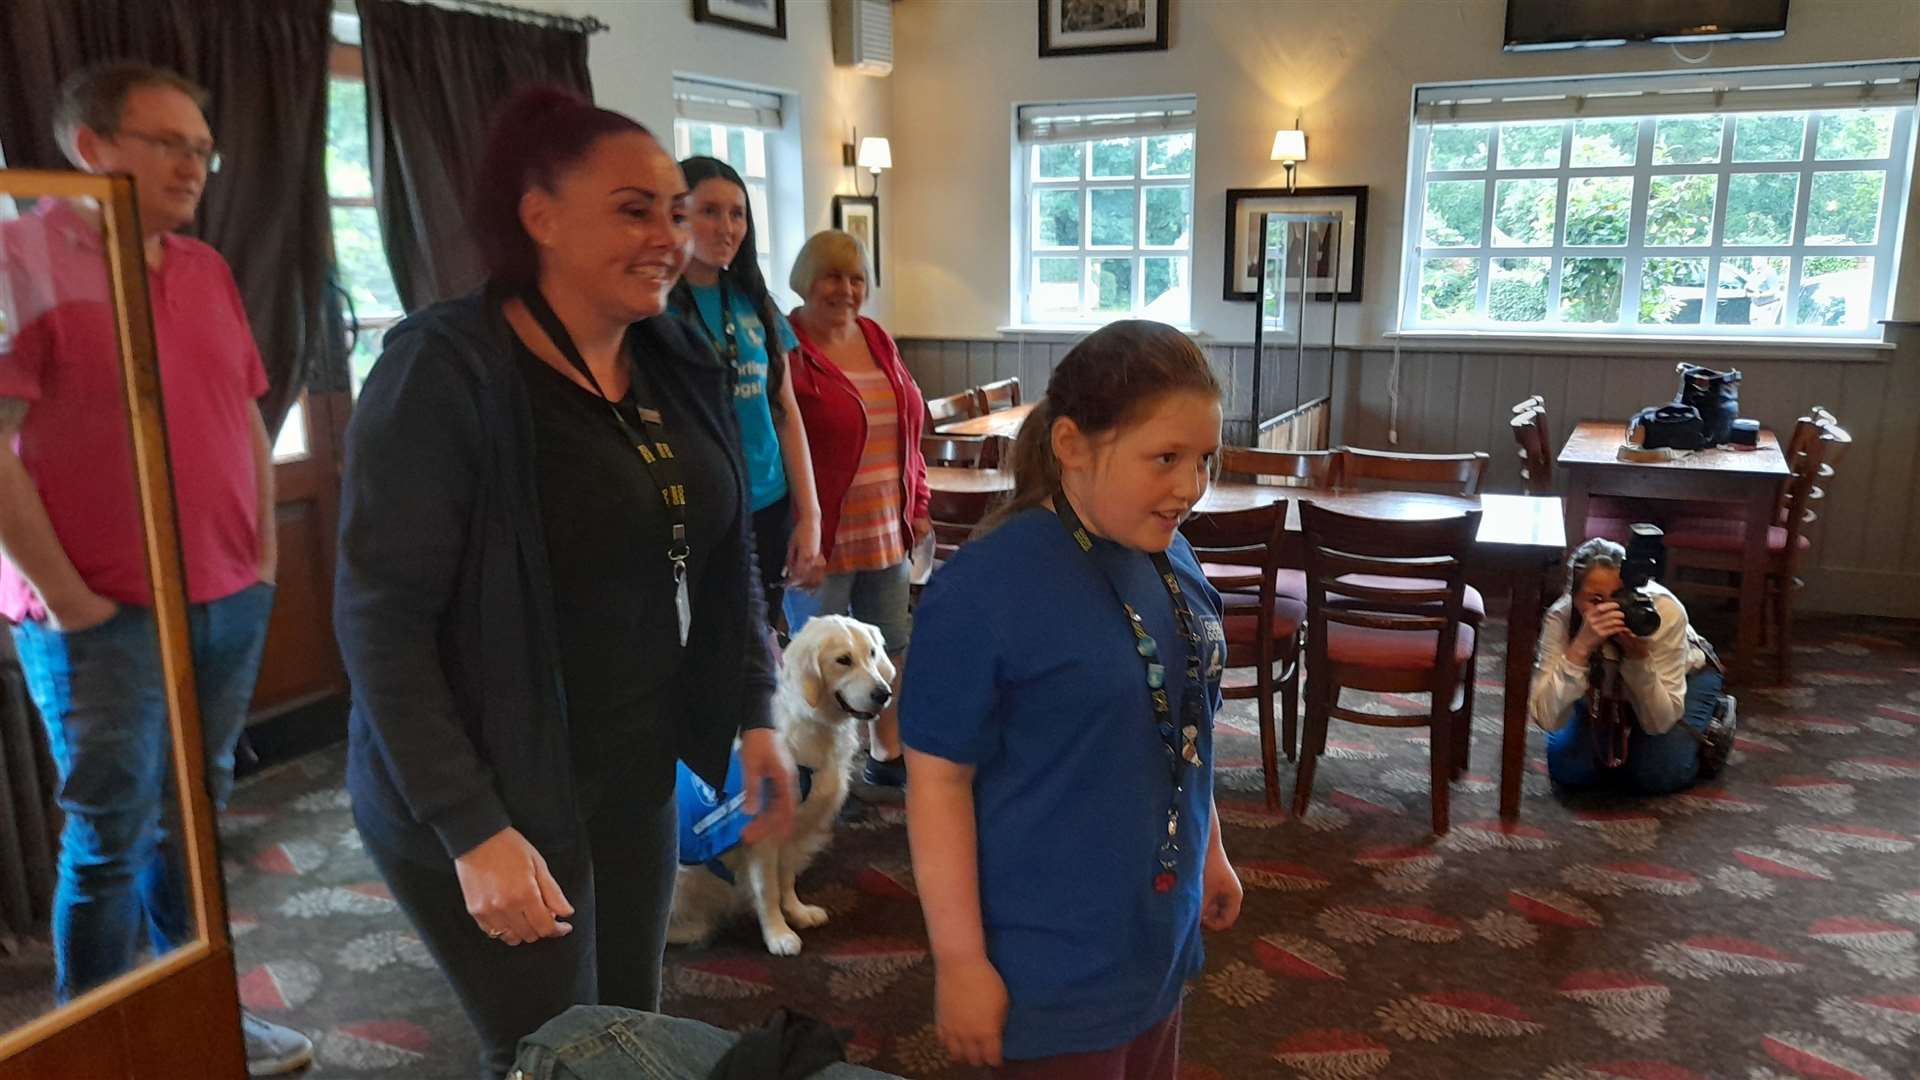 Scarlett Elliott and mum Michelle excitedly await the introduction of Max, a trainee guide dog she named